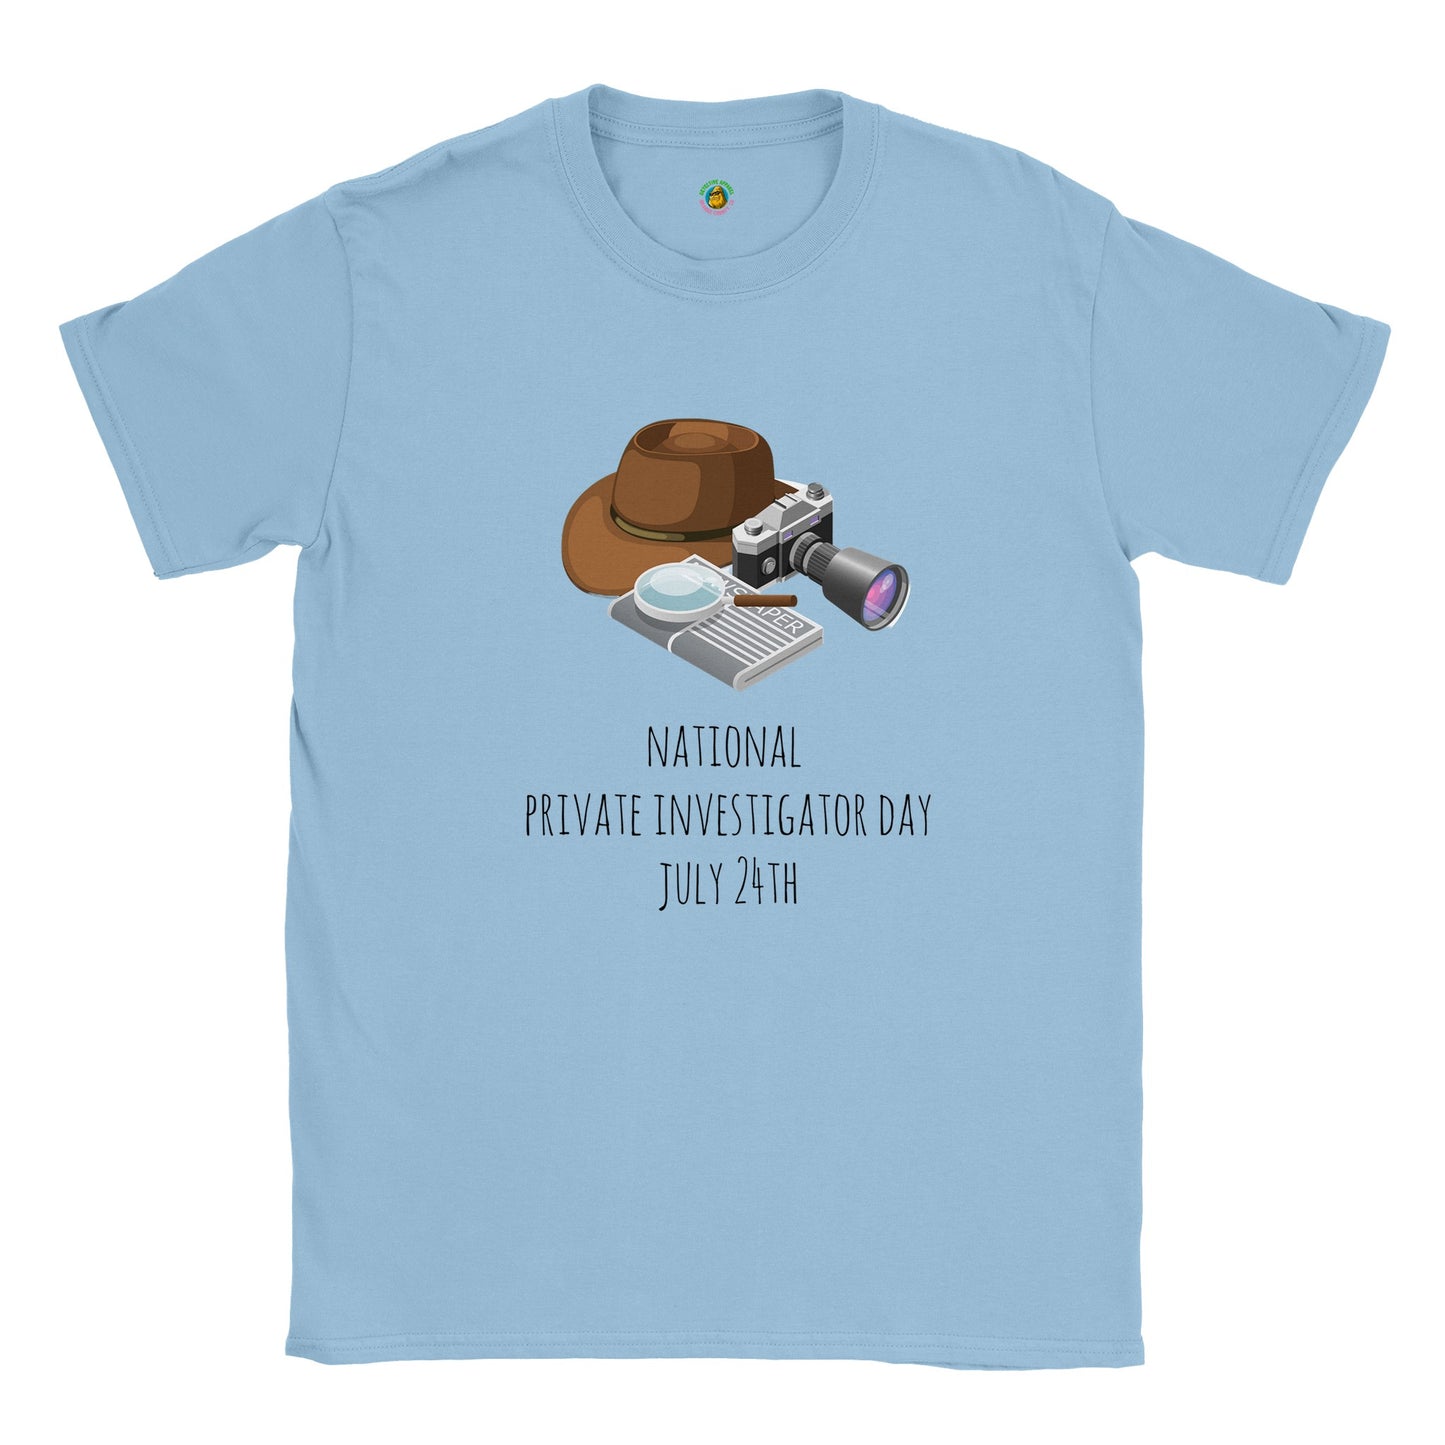 Short-Sleeve Unisex Crewneck T-shirt - Happy National Private Investigator Day July 24th